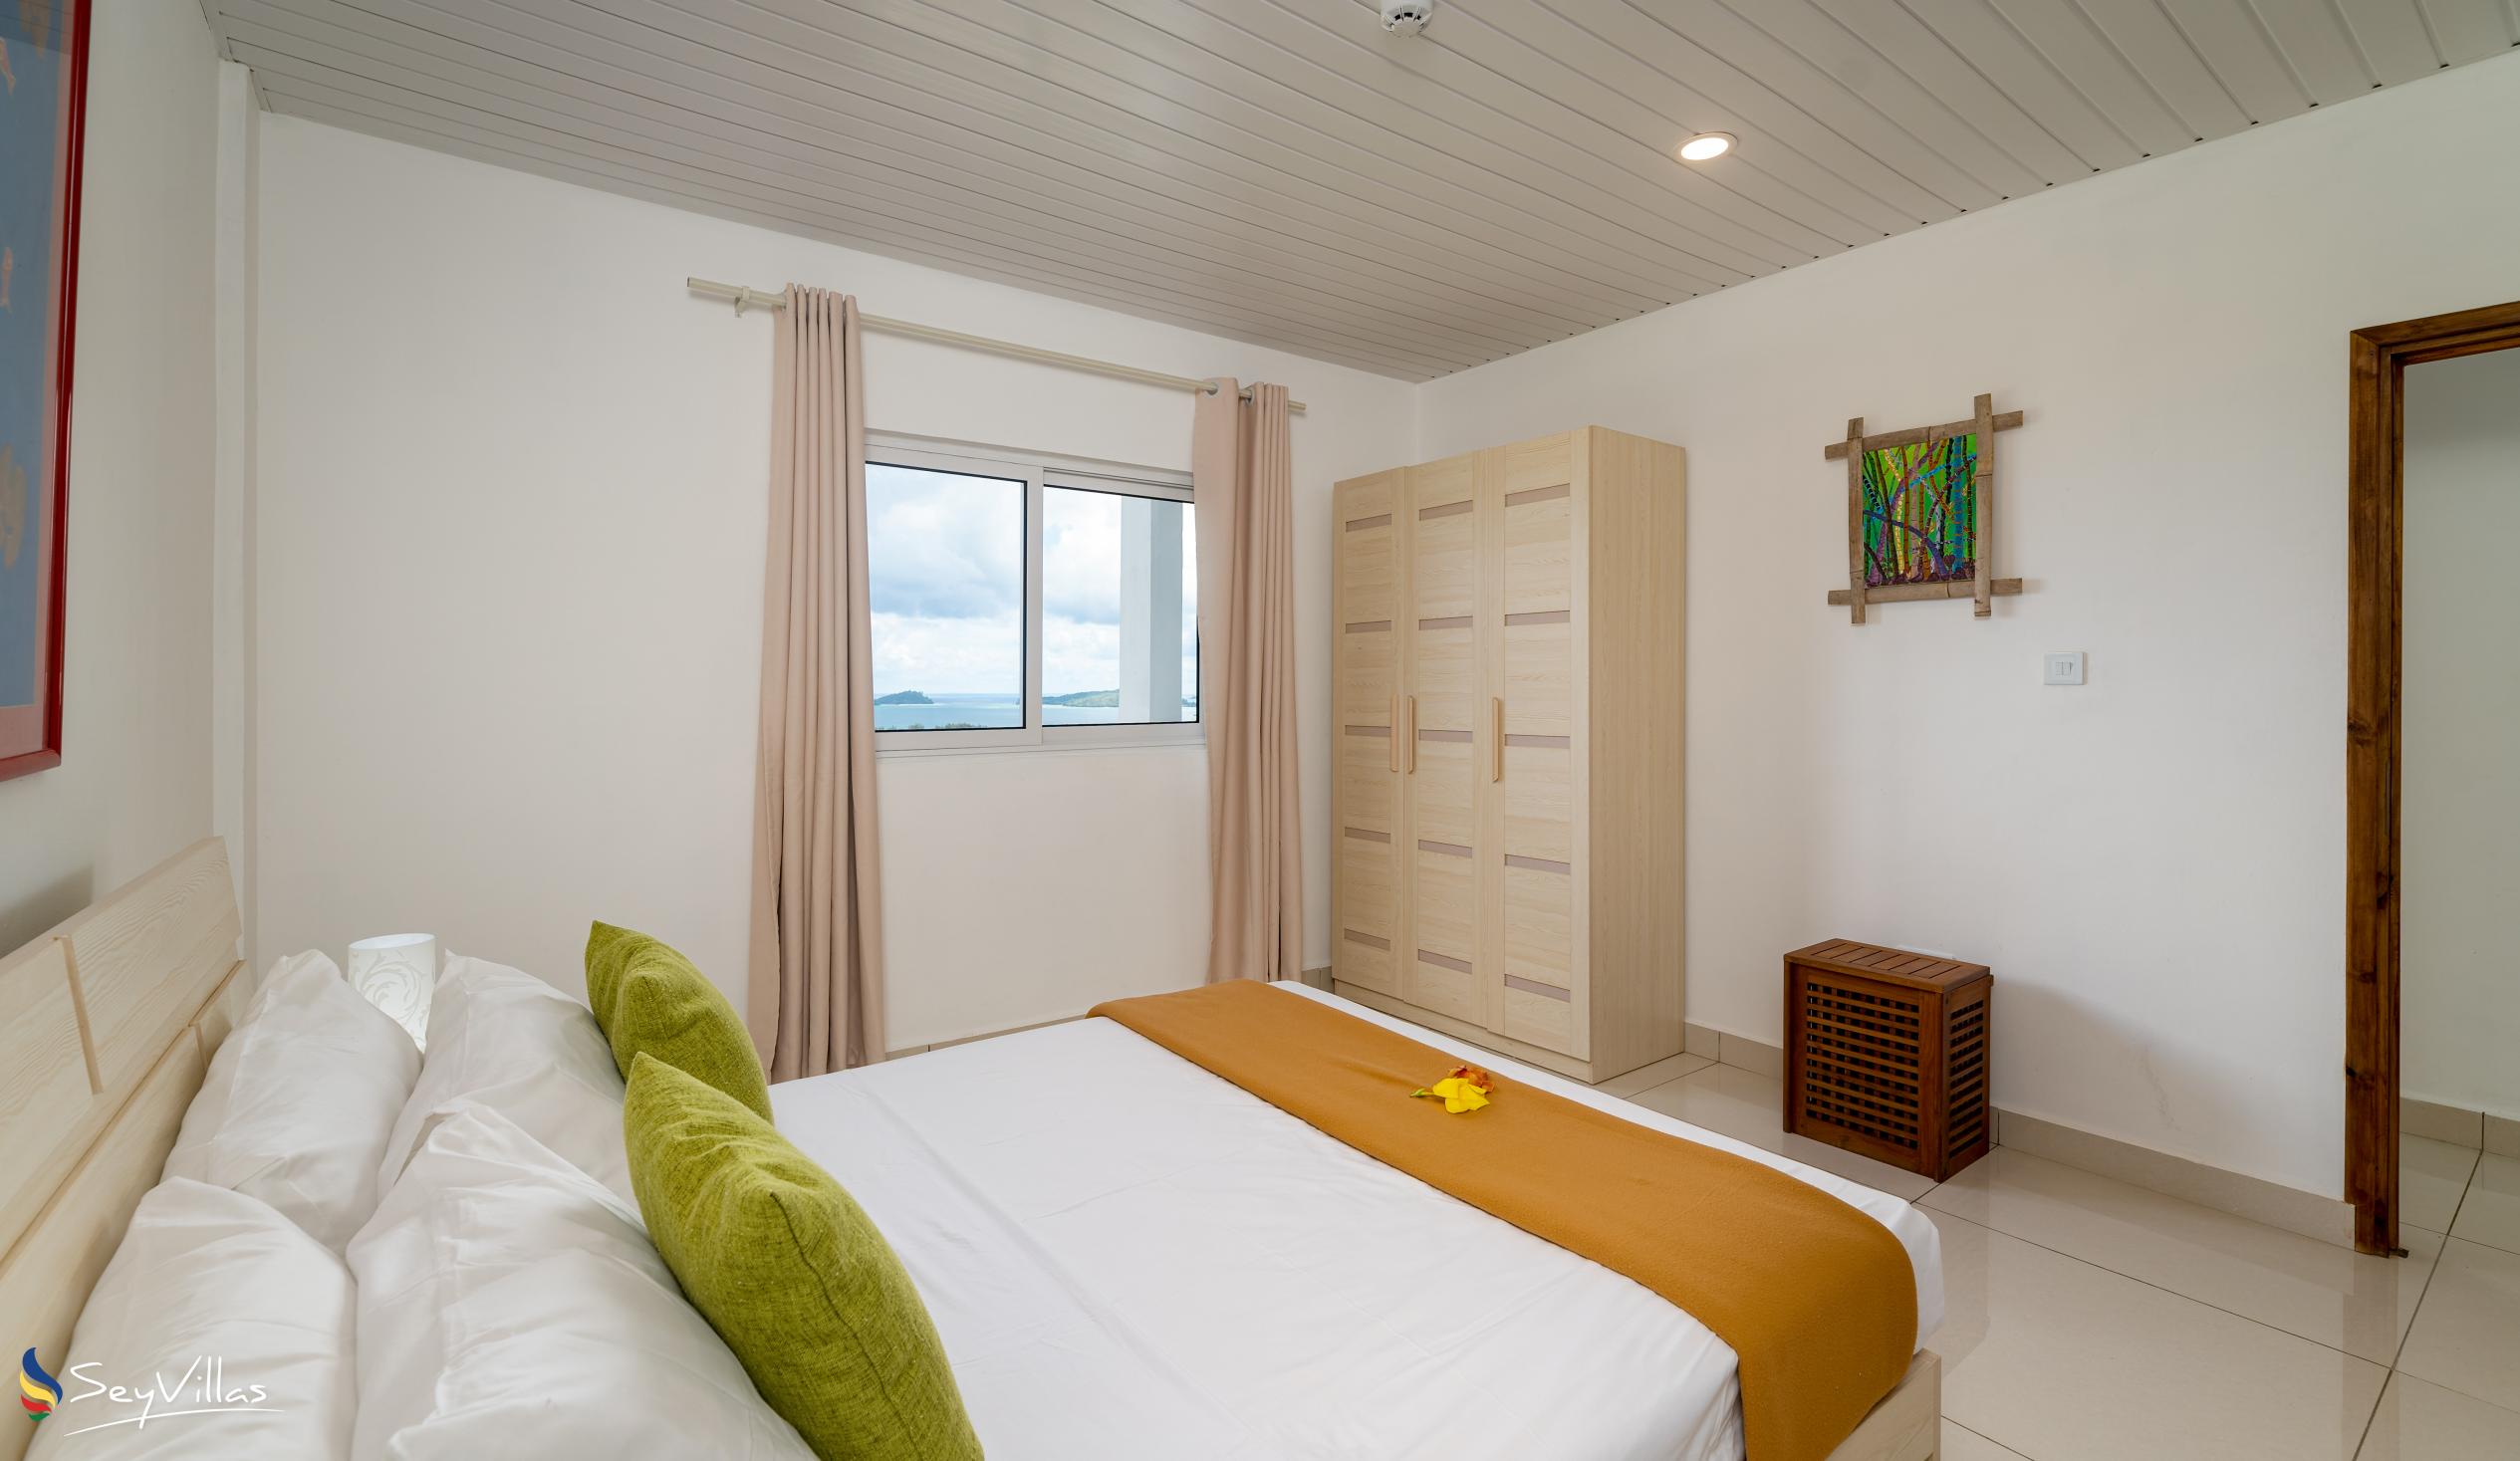 Photo 64: Creole Pearl Self Catering - 1-Bedroom Apartment - Mahé (Seychelles)